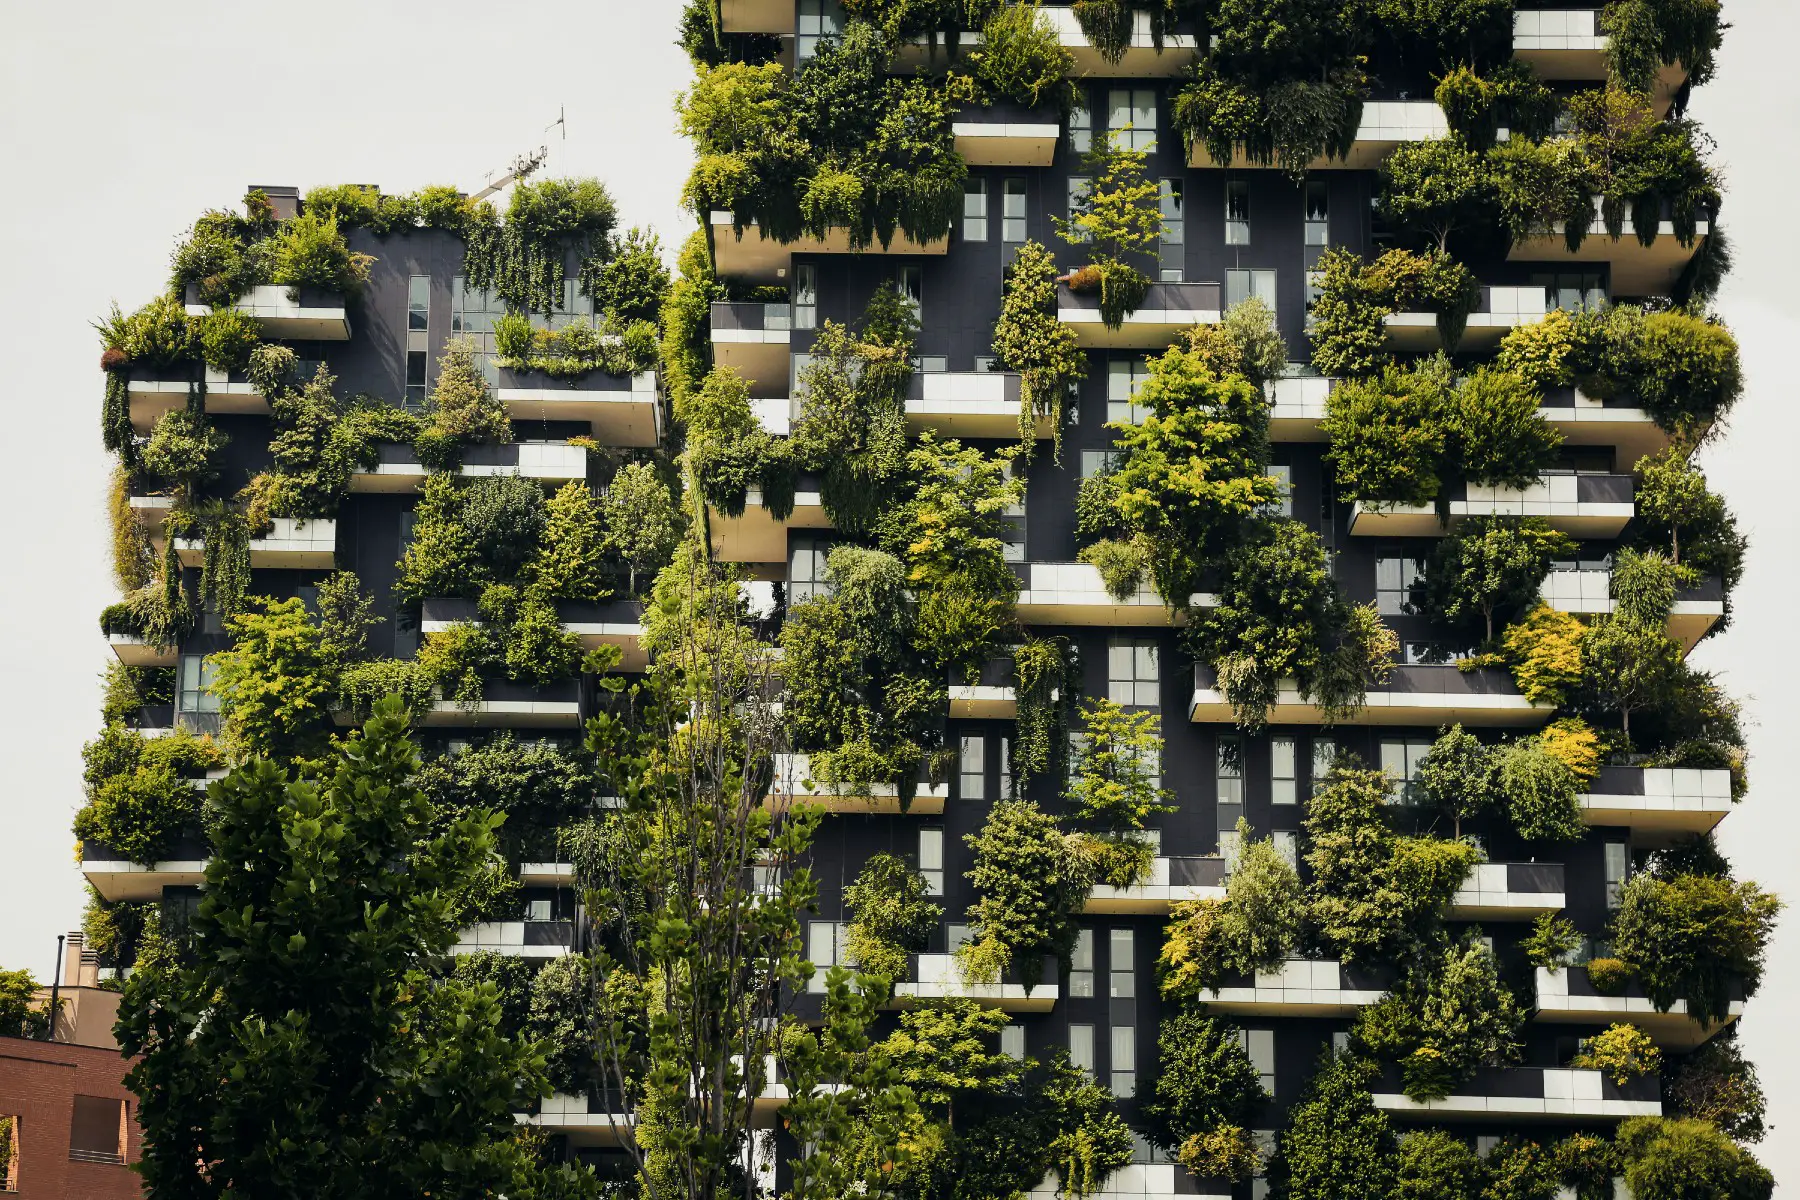 Ecological skyscraper and Residential complex Bosco Verticale in Milan, Italy. Modern sustainable architecture in Porta Nuova district.